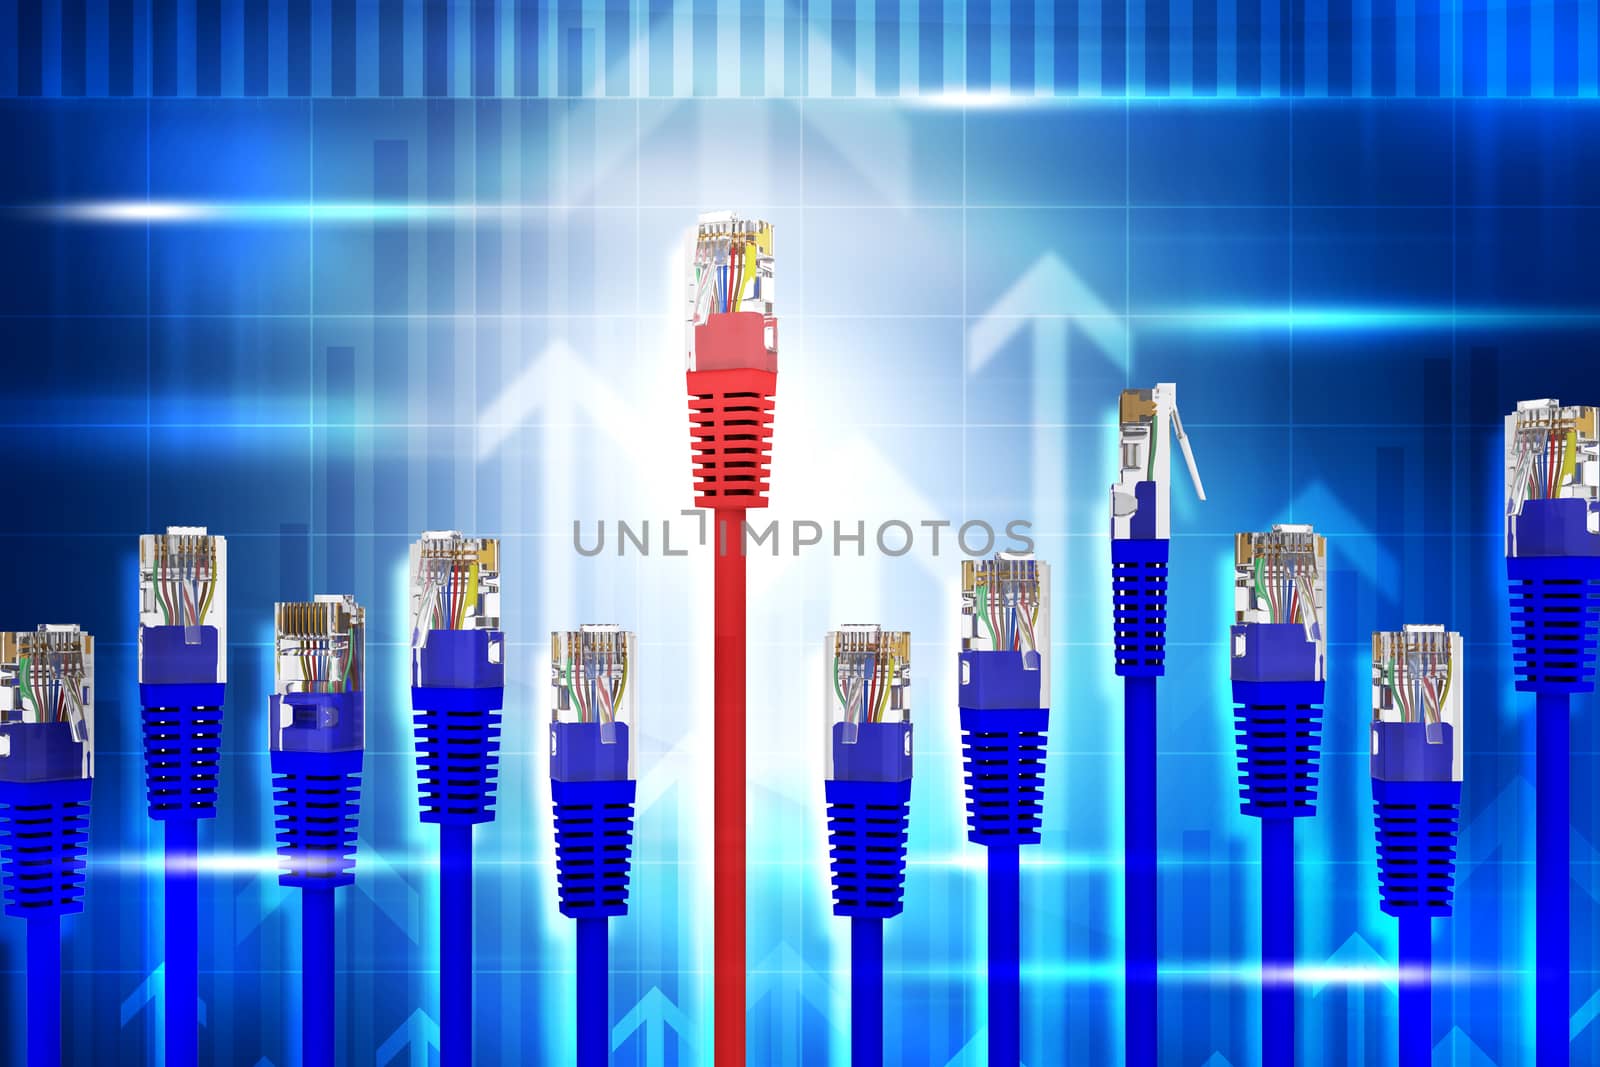 Set of computer cables on abstract blue background with arrows